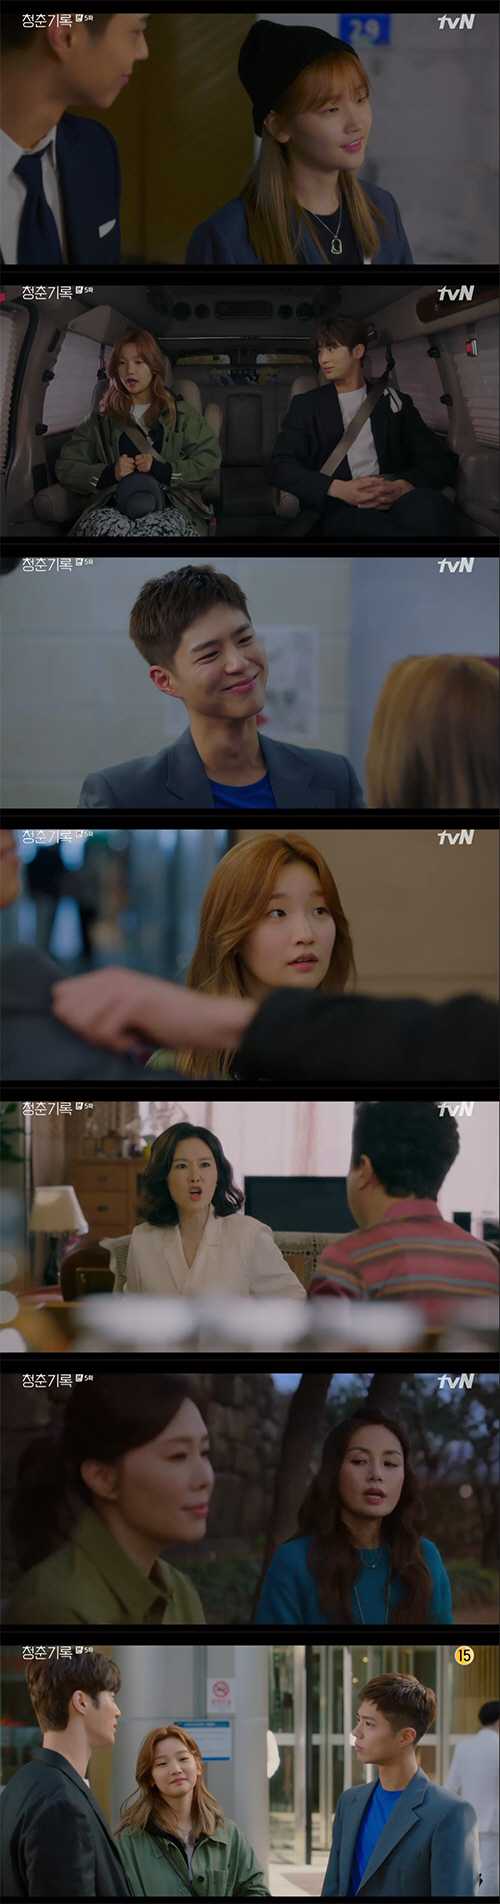 Park Bo-gum Confessions to Park So-damIn the TVN Monday drama Record of Youth broadcast on the 21st, Park Bo-gum made Confessions of the mind shaking to Park So-dam.On that day, Won Hae-hyo (Byeon Woo-suk) picked up a stable man to work together outside, saying, My dream came early.My goal was to have a brand to stabilize. Thank you for letting me do this, said Won Hae-hyo, who is stable. If you thank me, do well. I also have something to thank me.I kept Hye-joon as a fan club. We do not need to protect it now, we have solved it. Now, thank you for one thing, he said.Lee Tae-soo told Sa Hye-joon, who met in the bathroom, I sent you out and bought a building.I could just get rid of one of you, said Sa Hye-joon, breaking his arm and ignoring him.Lingnan (Park Soo-young) told his wife Han Ae-sook (Ha Hee-ra): When you try to go to the house, you take good care of your clothes.It is also a clothes worn, he said, and Han Ae-sook explained, When I was a child, I wore clothes. At this time, Sa Kyung-jun (Lee Jae-won), who returned from seeing the house, said, I came back from outside after seeing the house. Mom, stop working now. I will give you a month.In addition, Sa Kyung-joon declared, I will be independent as an officetel near the company.Han Ae-sook asked, How much is the rent? And Sa Kyung-joon said firmly, 90 at 500. So Han Ae-sook hit Sa Kyung-joons back saying, He looks like his father.Han Ae-sook opposed independence, saying, He knows that he has vanity and bluff. He is a perfect father.Steaming video (Shin Ae-ra) told her daughter Hannah Jeter (Jo Yu-jung): I passed law school, but where are you going?I should celebrate with my family. Hannah Jeter said, I passed my aunt, he said. I passed my aunt. Steaming video told Han Ae-sook, who works as a housekeeper, Sit down and drink coffee, but Han Ae-sook refused, and Steaming video said, Normally, I draw a line from my side.Its a bit weird, he said.Earlier, the clock was missing from Steaming videos house, and Han Ae-sook, who was suspected, quit his job.However, Steaming video did not like the new housework assistants, and eventually met Han Ae-sook, who works elsewhere, pretending to be a coincidence. Come back to my house.Ill give you the rain in time. I dont like it, and I wont come anymore. He said, 100,000 won a day.Han said, It was not easy to work at my sons friends house. But my son cheered me. It was good to be a self-esteemed son.But I am praised for every place I learn to work hard. I will go if I need it. Han Ae-sook also informed Sa Hye-joon, Today, at 8 oclock, the family meeting will go out. Please attend.In the story of a stable Sa Hye-joon and Won Hae-hyo, he went to a Chinese house in a car with a stable Sa Hye-joon and Lee Min-jae (Shin Dong-mi).While I was parking a stable parking lot with Sa Hye-joon, who moved to the restaurant, the child came out and an accident occurred. Sa Hye-joon wrapped his arm around the stable and said, Why did you already unfasten your seat belt?An Jeong-ha and Sa Hye-joon had a fight, and Lee Min-jae, who was behind them, misunderstood, Are you two dating?When he returned home, he persuaded him, I am in favor of going home, do you have a room? Han Ae-sook said, I am against independence.If you add the monthly rent to 90, you will not be able to collect money for a lifetime.Sae Kyung-joon said, Hye Jun said that it was inconvenient to use a room with his grandfather. Sae Hye-joon said, If you talk like that, do not you think that my grandfather is uncomfortable to use a room with my grandfather?My brother is a typical split, he said angrily.I know those children well, the people who cheat are obvious, said Samingi (Han Jin-hee), who told Sagyeongjun, who is going to go out alone. I have now paid for the crime.Where is the bigger sin? He was angry at Lingnan, who sided with him.When he returned to his room, he informed Sa Hye-joon that he had made a senior model decision, saying, I decided to model. I will show it to your father because it is good.Sa Hye-joon drove to the filming site with Lee Min-jae. Sa Hye-joon said, I was analyzing the carcutter and the character talked to me.Won Hae Hyo and Sa Hye Jun went to the filming site to get makeup from Ahn Jung-ha, and Won Hae Hyo said, Today, Sa Hye-joon hits Park Do-ha. I have to go to see after shooting.So An Jeong-ha also said, I will look.Actor is Actor, said Won Hae-hyo, who watched the shooting scene of Sa Hye-joon. Won Hae-hyo wanted to praise Ahn Jung-ha, saying, Did I do that?Sa Hye-joon changed his ambassador unlike practice, and the director immediately revised the scenario, saying, It seems to be okay. After that, Sa Hye-joon hit Park Do-ha tremendously and Park responded nervously.Lee Min-jae also visited Lee Tae-soo and said, Thank you for telling Yoon about our sa Hye-joon. Lee Tae-soo said, I have a quality as a manager.But I do not know why the shooting is not over now. Lee Min-jae said, Our passion of Hye-joon seems to have impressed the production team. Lee Tae-soo laughed, saying, There is such a temperament.On the filming site, Park hit the head of Sa Hye-joon with a real tree, and Sa Hye-joon, who was hit by a tree, was injured in bleeding from his forehead.I was relieved to say, I am glad I did not go to the hospital.I was worried about Sa Hye-joon, who was tired of saying, Why do you insist on going home?Sa Hye-joon, who took me to the house of Anjeongha, asked, Are you tired of waiting for me today? And said, I thought nothing was easy.I was so good today, I was so good that I did not think anything about it, said Sa Hye-joon.At this point, the showers came down, and Sahejun said, I want to get rained. Im confused. I dont know if I should tell this. I think I like it.I think you like it, confessions, which embarrassed An Jeong-ha.